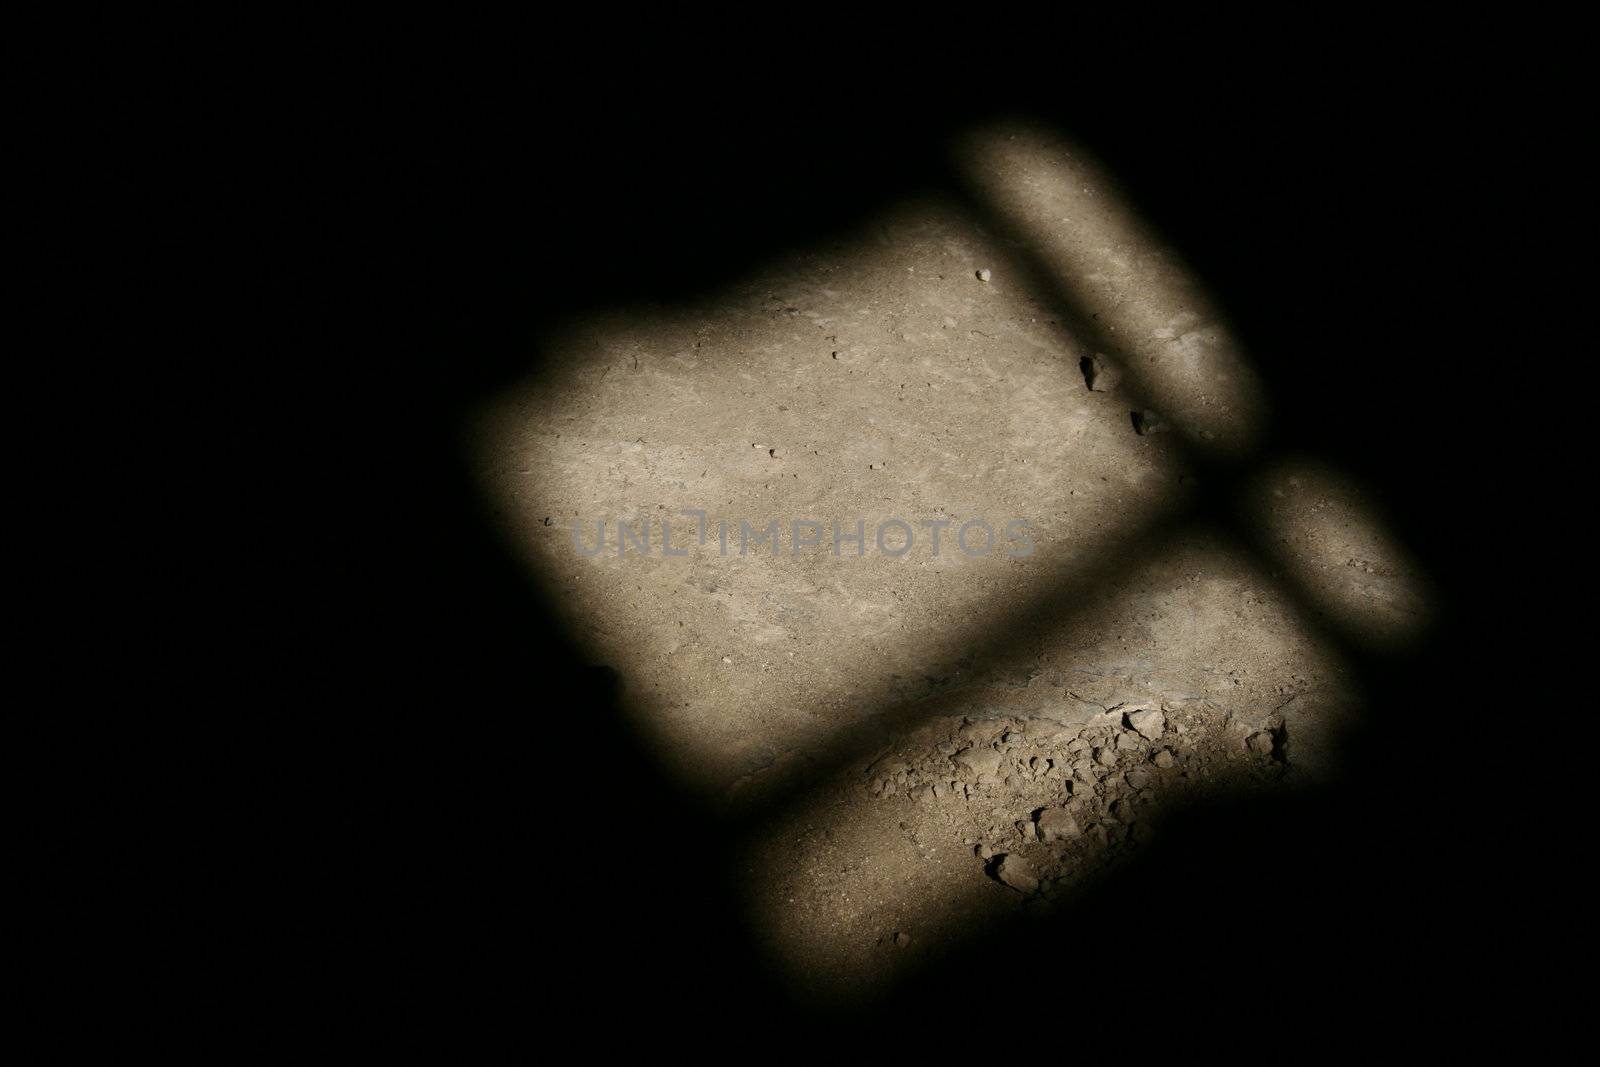 An abstract photo of light shining through the window, on the ground. It has quite a lonely, sad, atmosphere to it.